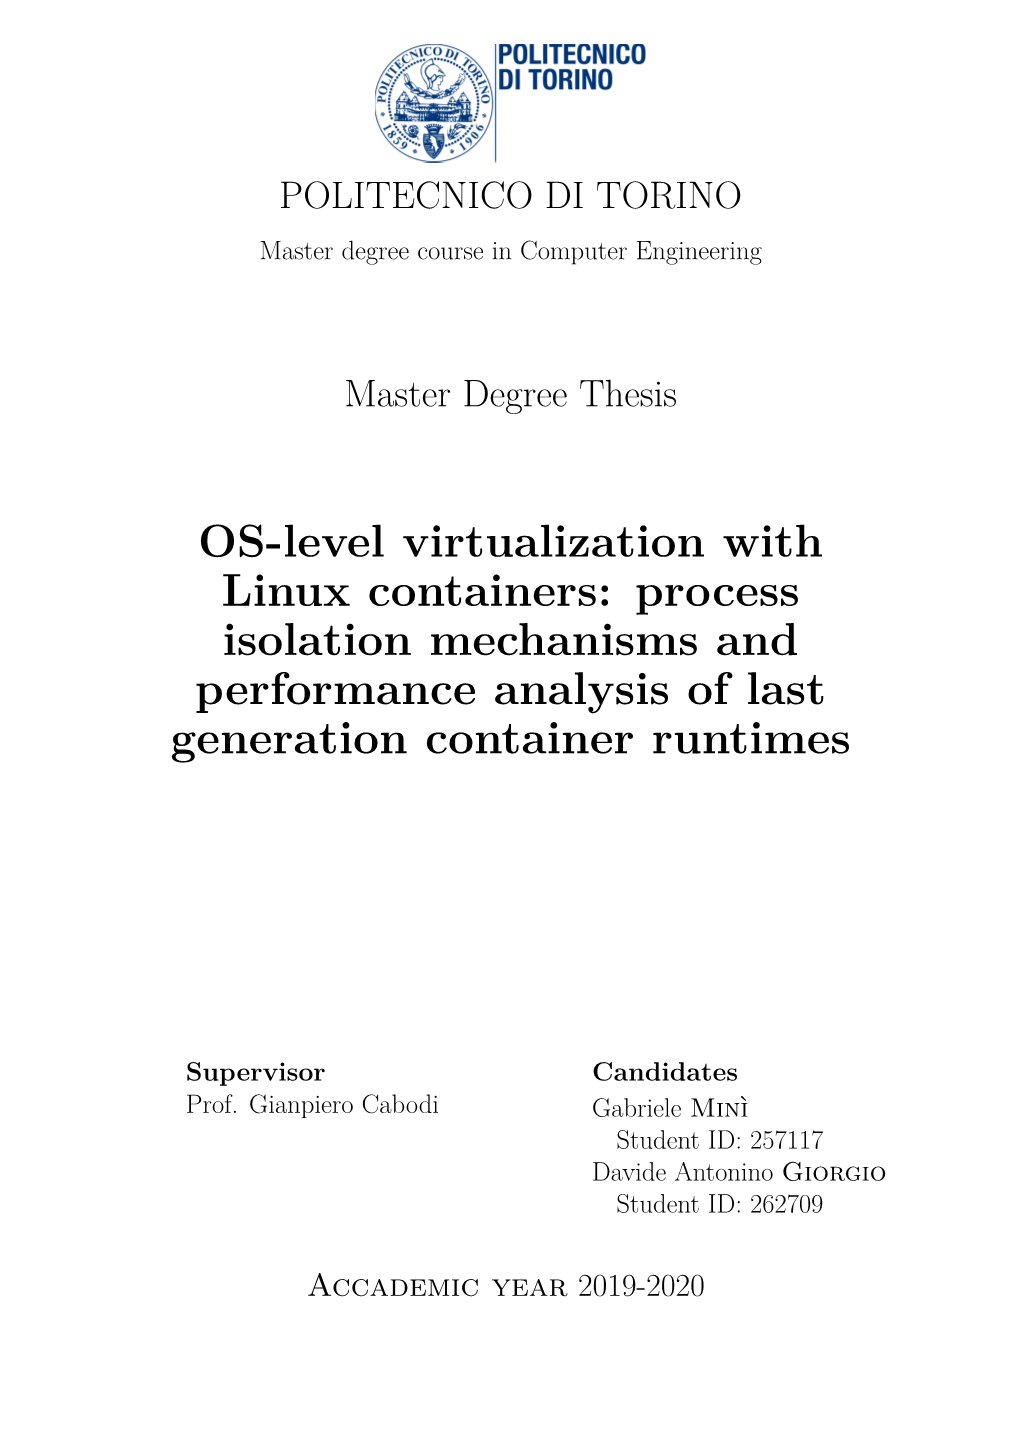 OS-Level Virtualization with Linux Containers: Process Isolation Mechanisms and Performance Analysis of Last Generation Container Runtimes